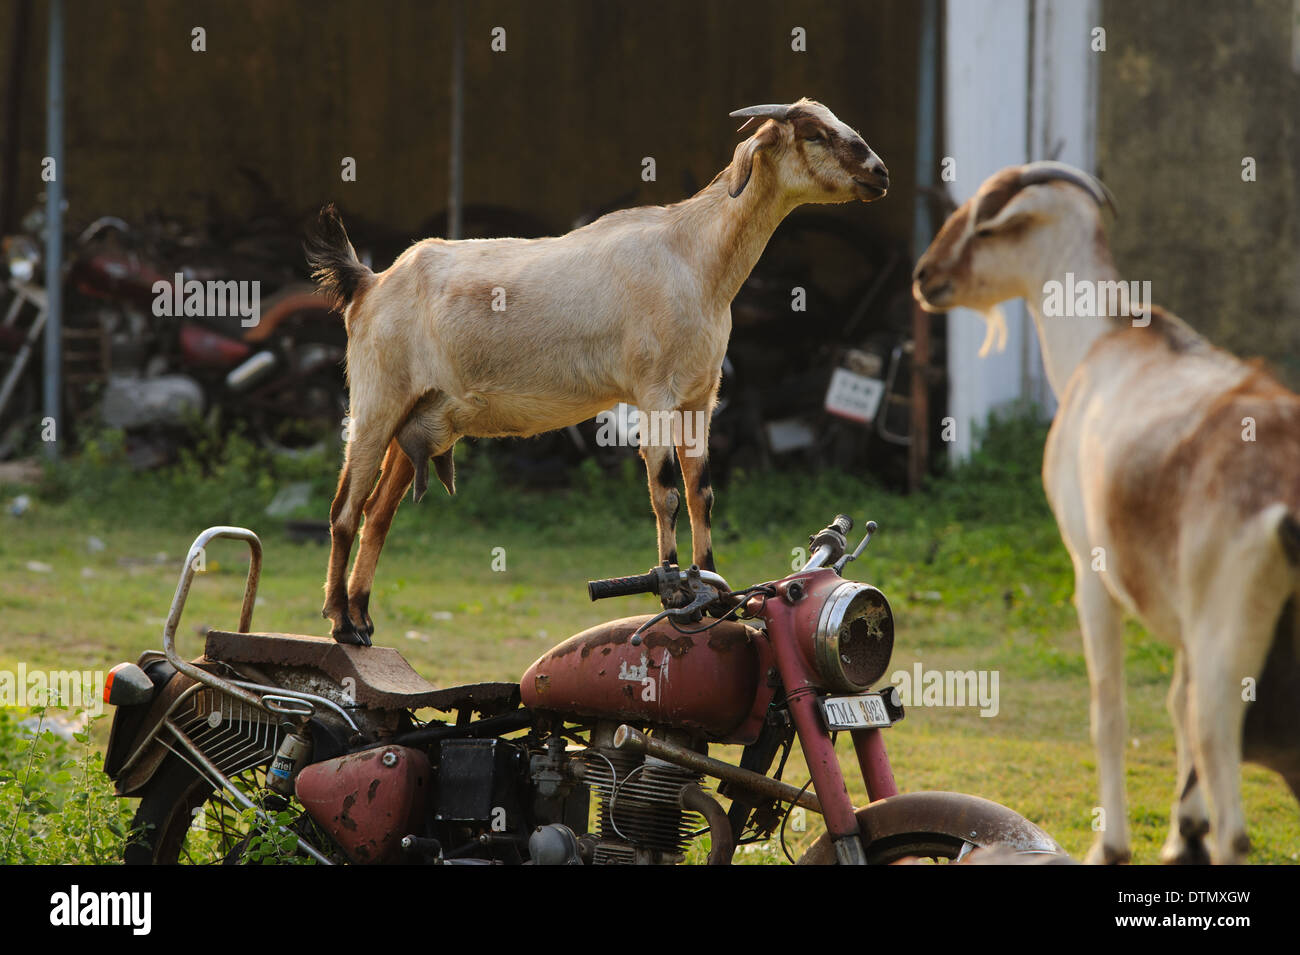 Goat standing on an old Royal Enfield motorcycle.  This was an everyday occurrence in Mamallapuram India. Stock Photo